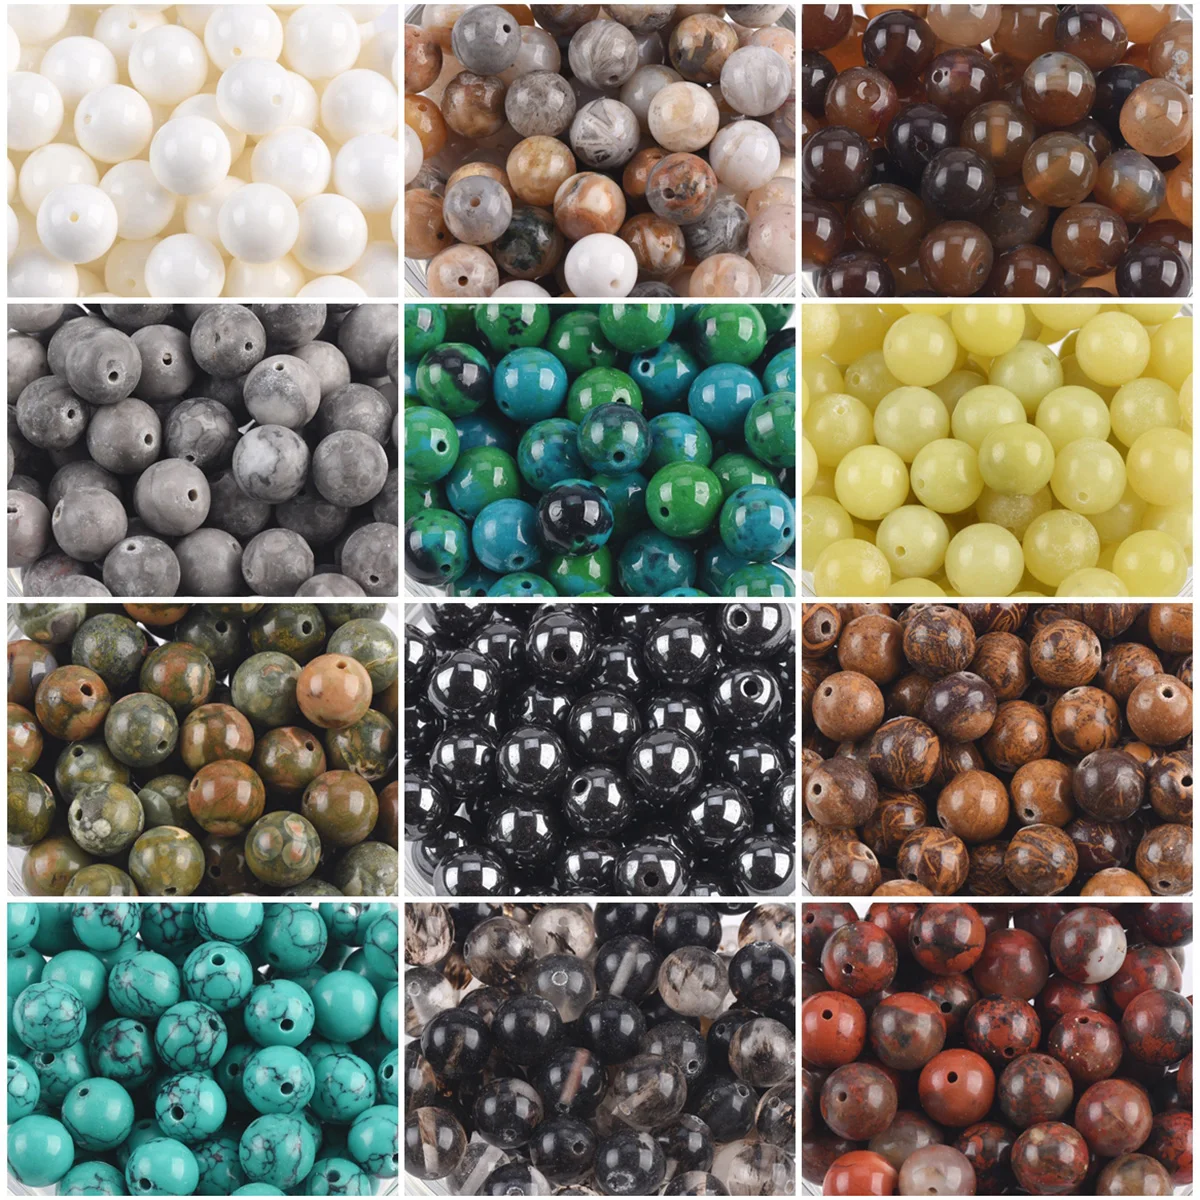 Round 4mm 6mm 8mm 10mm 12mm Natural Stone Rocks Loose Spacer Beads lot for DIY Bracelet Jewelry Making Crafts Findings 20 pcs painted stone fish tank accessories rocks flat for painting stones crafts smooth kit good looking child selected diy